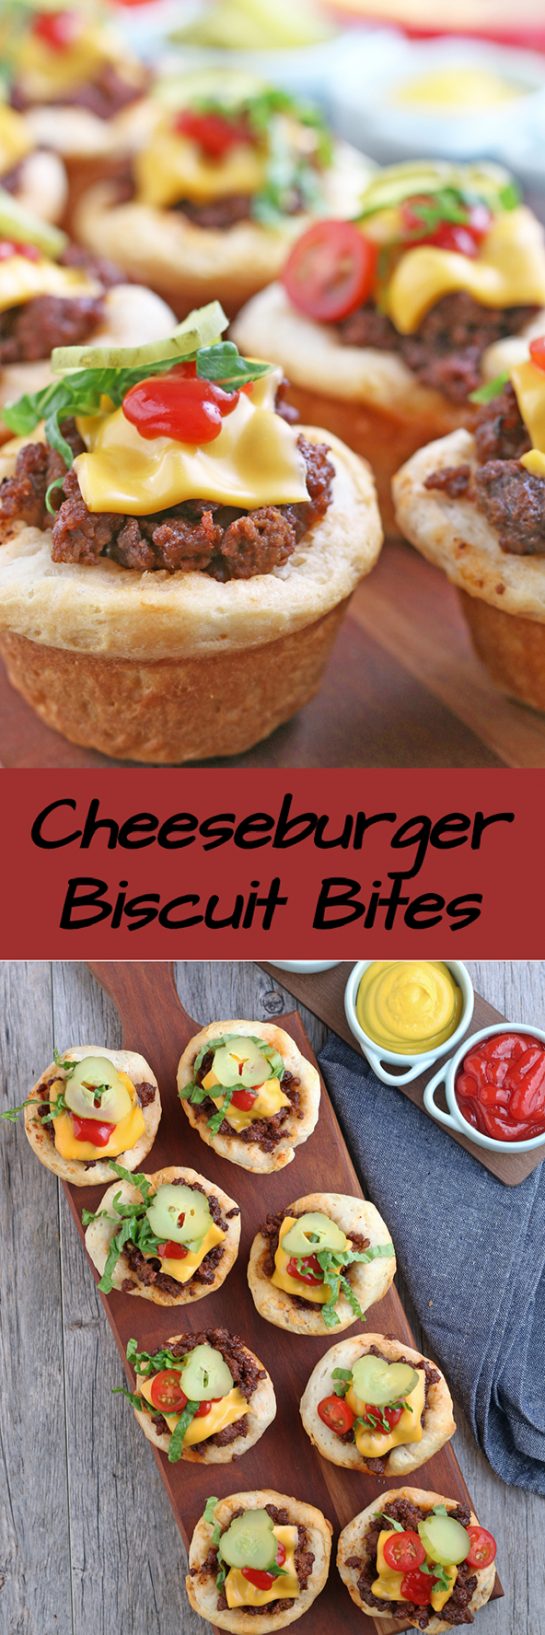 Cheeseburger biscuit bites are a family friendly dinner or appetizer for Super Bowl that can be ready in about 30 minutes. These cheeseburger cups are great for lunches too. They’re easy to make, tasty, and perfect for busy weeknight meals. 